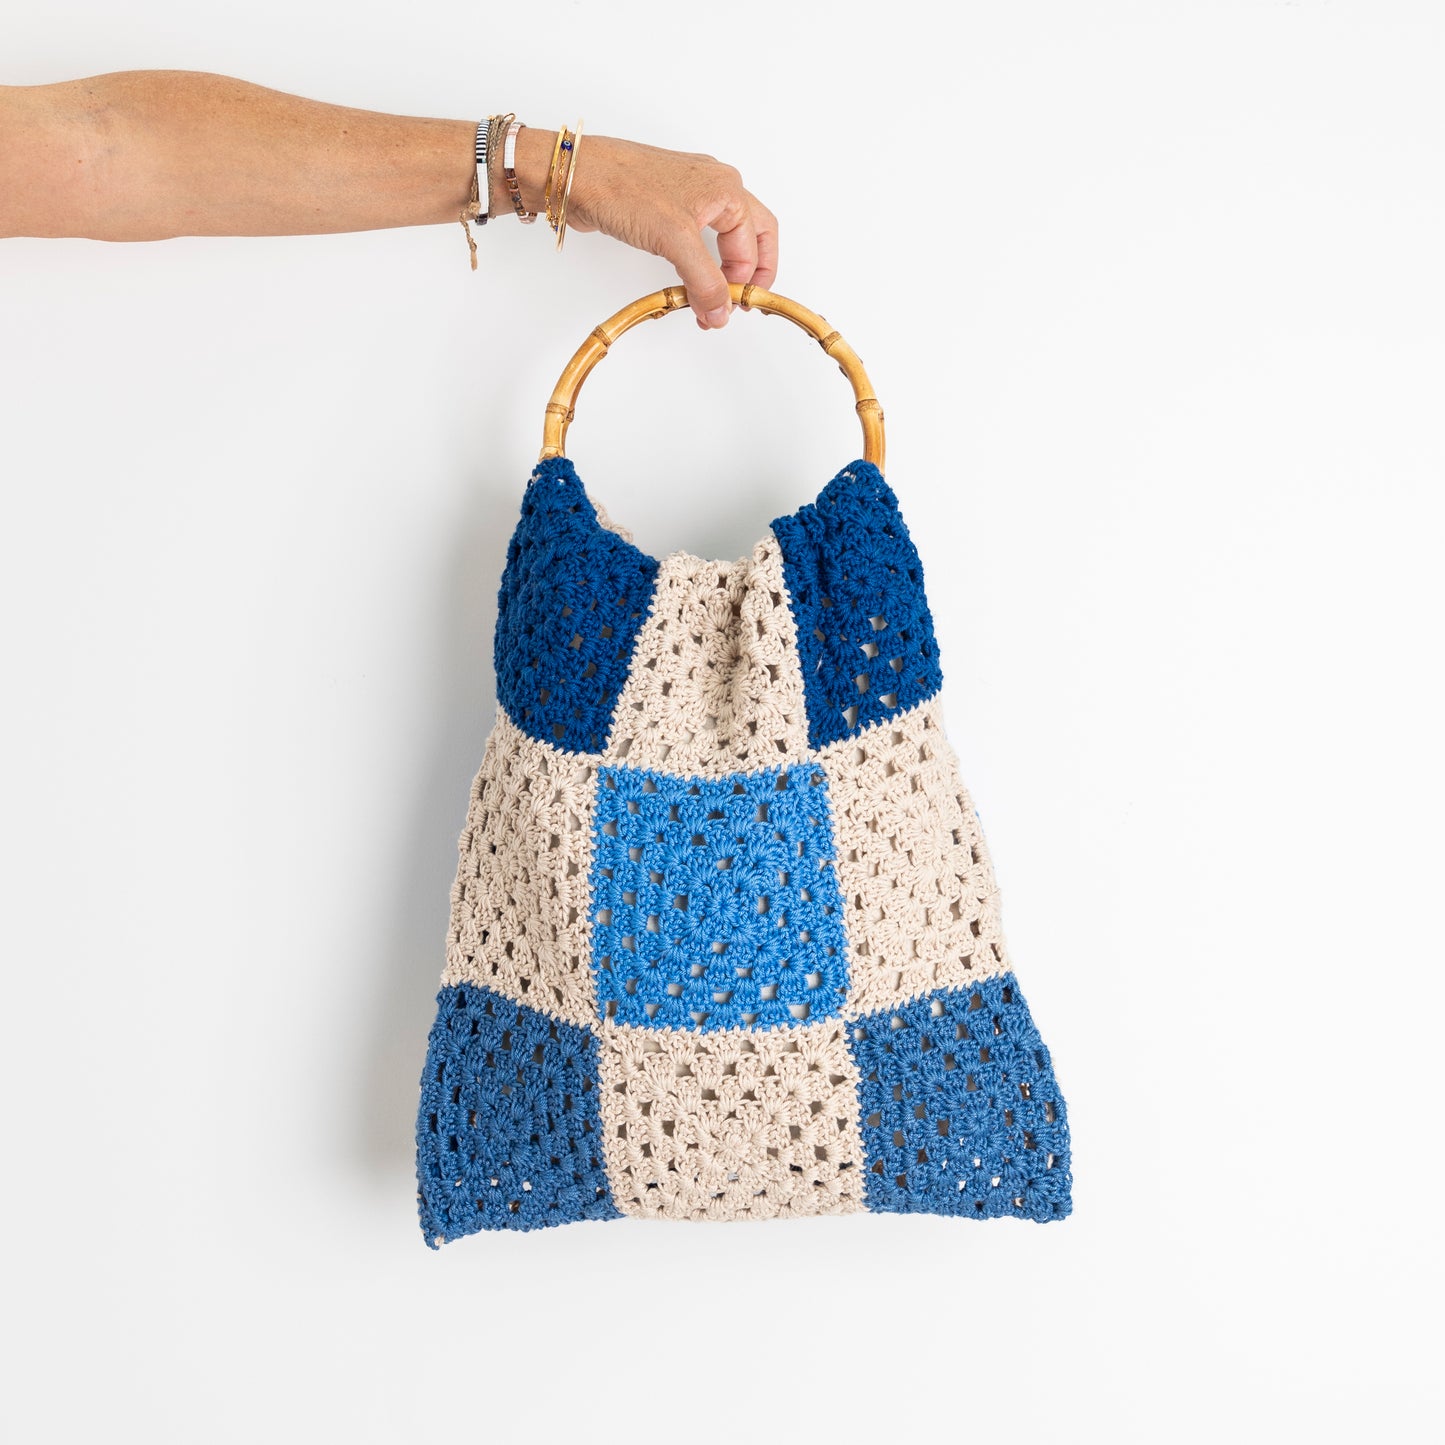 Repurposed, Crochet Blanket made into a bag with bamboo handles.